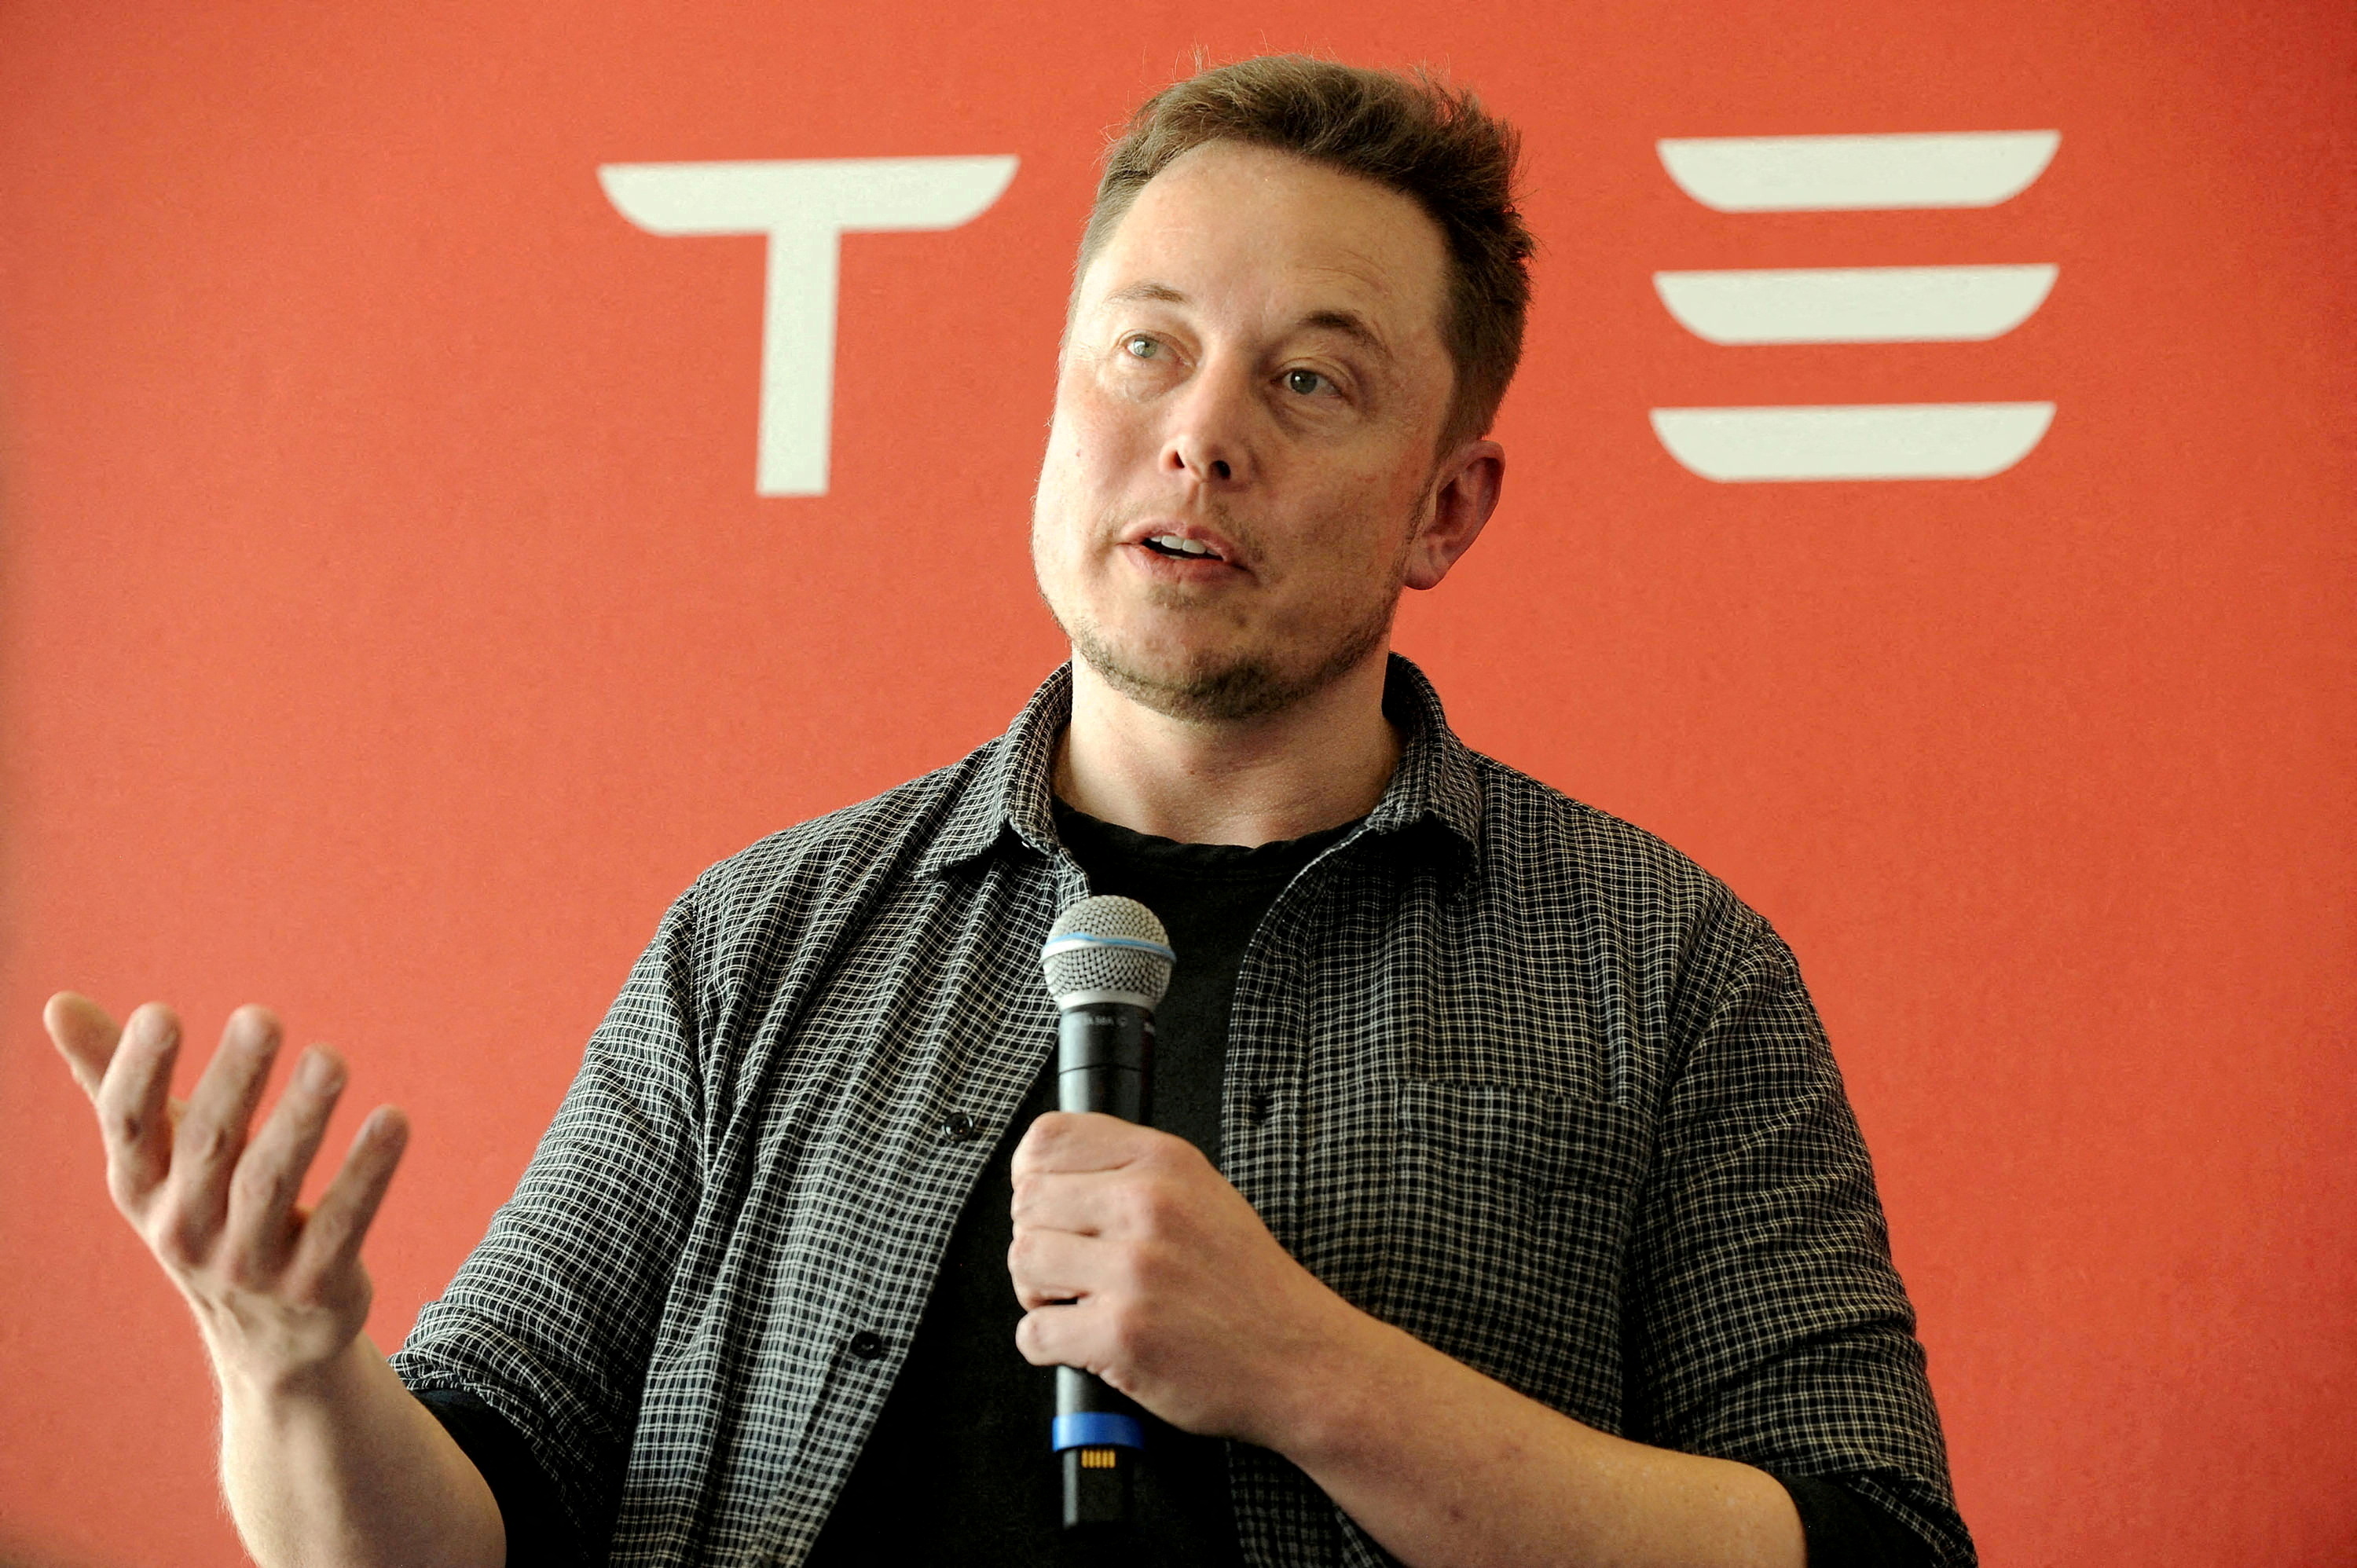 Founder and CEO of Tesla Motors Elon Musk speaks during a media tour of the Tesla Gigafactory, which will produce batteries for the electric carmaker, in Sparks, Nevada, U.S. July 26, 2016.  REUTERS/James Glover II